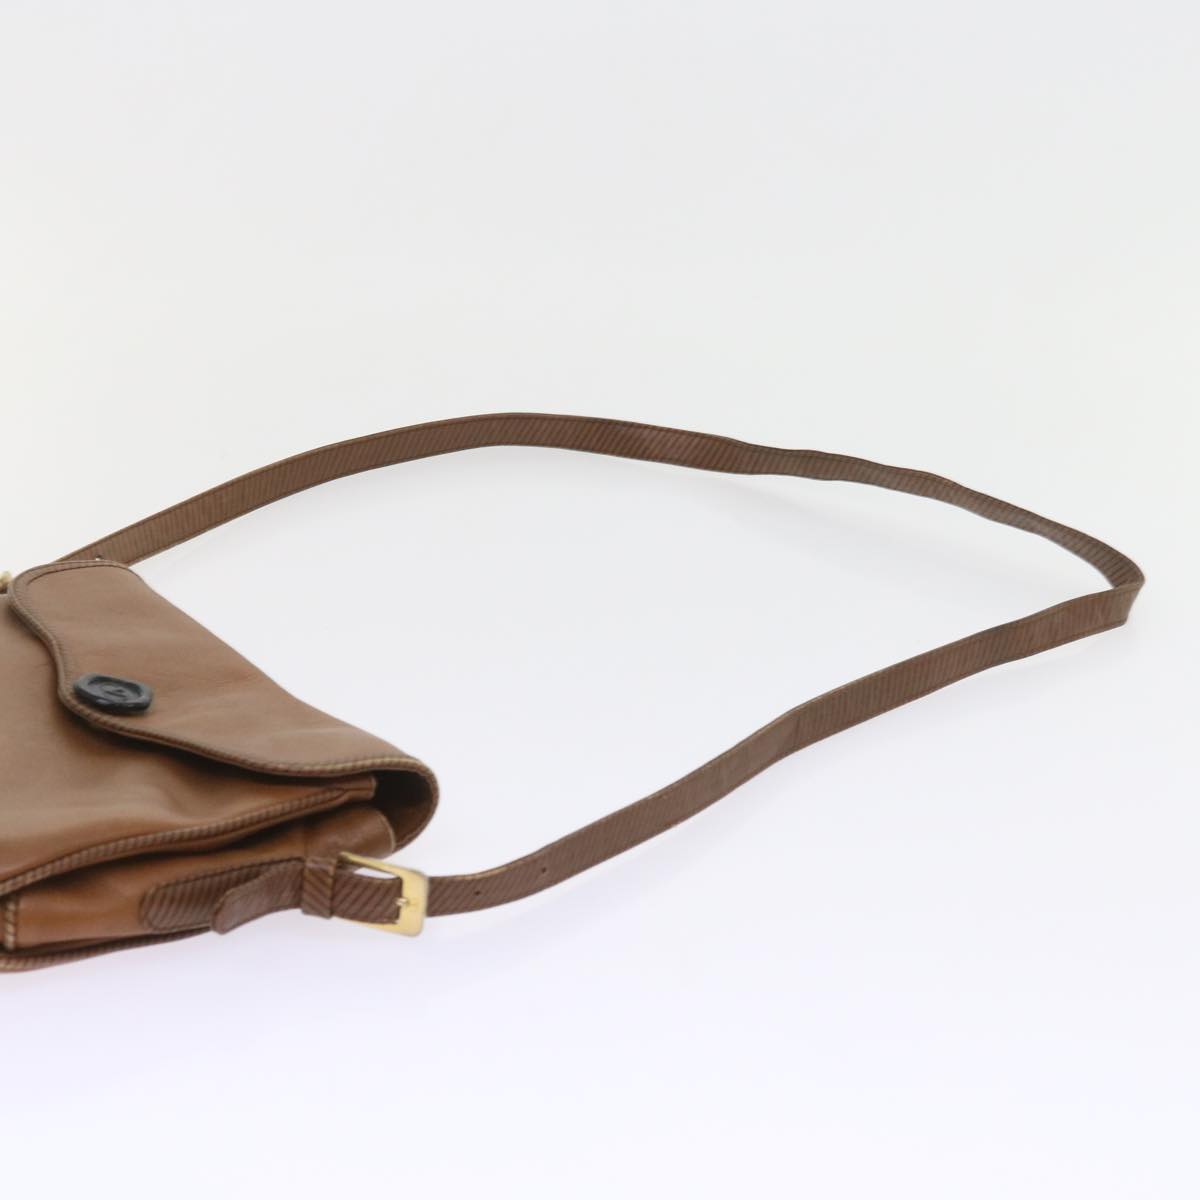 VALENTINO Shoulder Bag Leather Brown Auth bs9581